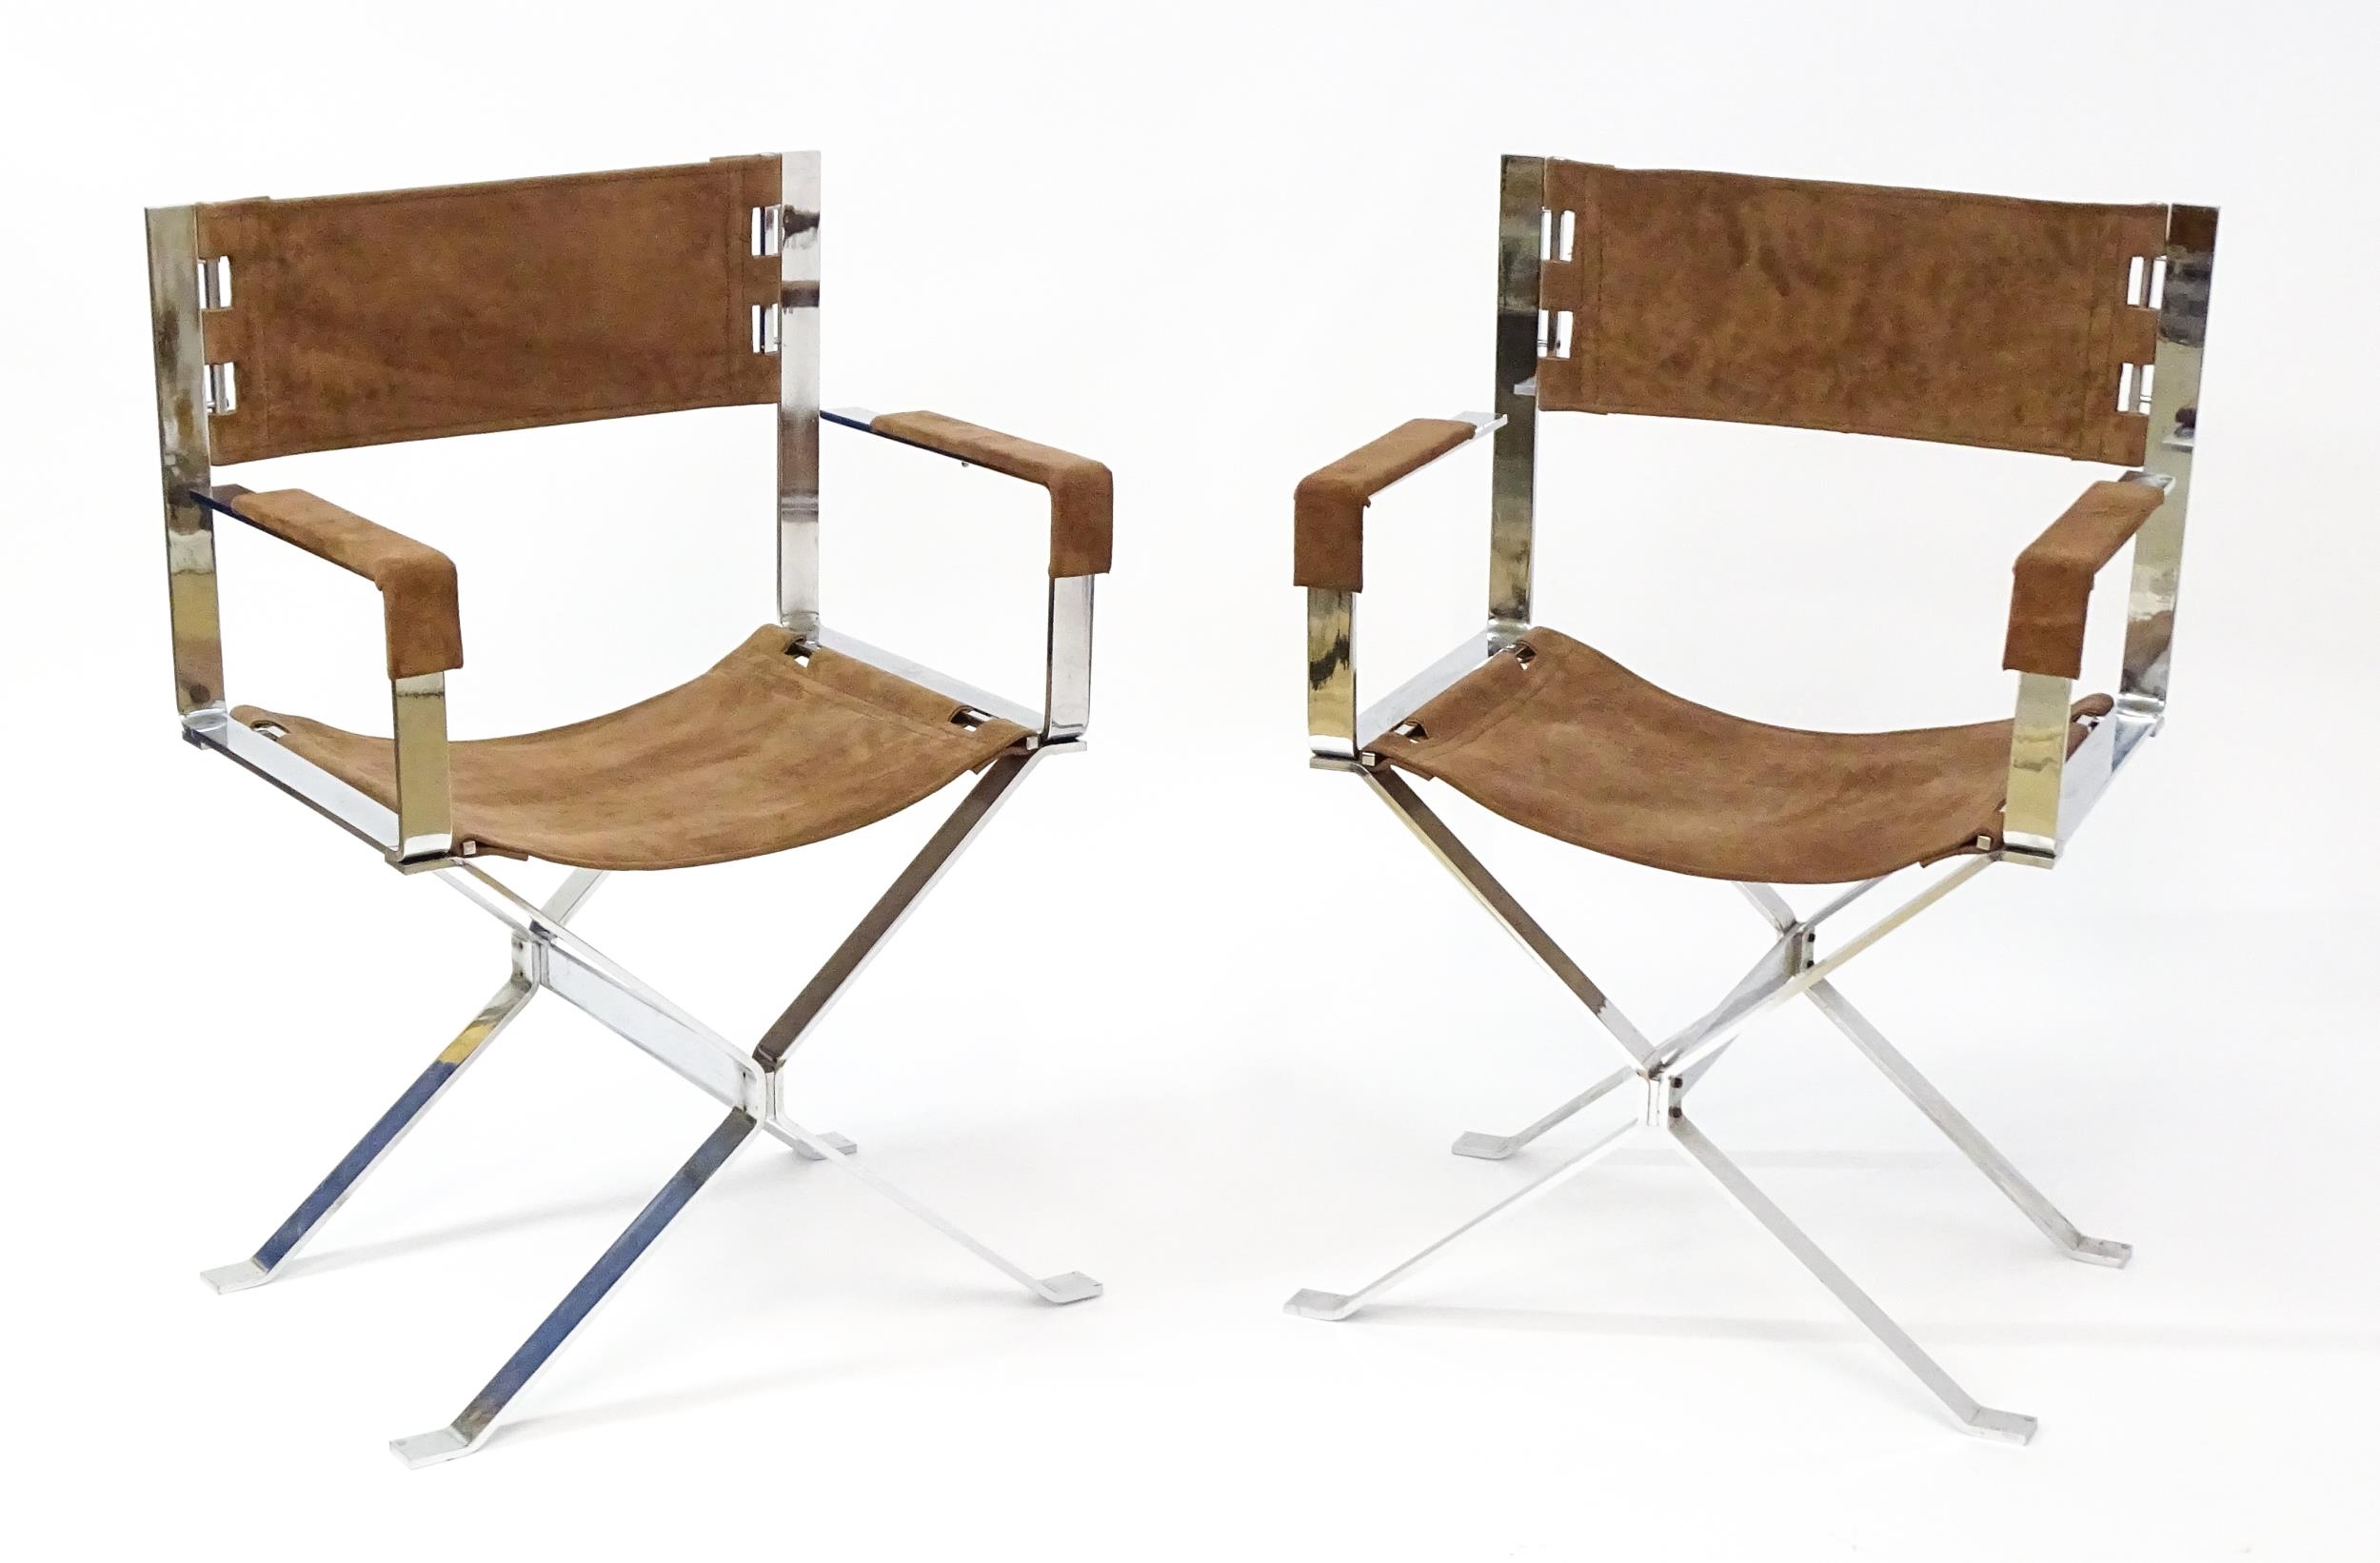 A pair of Alessandro Albrizzi designed directors chairs with chrome frames and suede upholstery